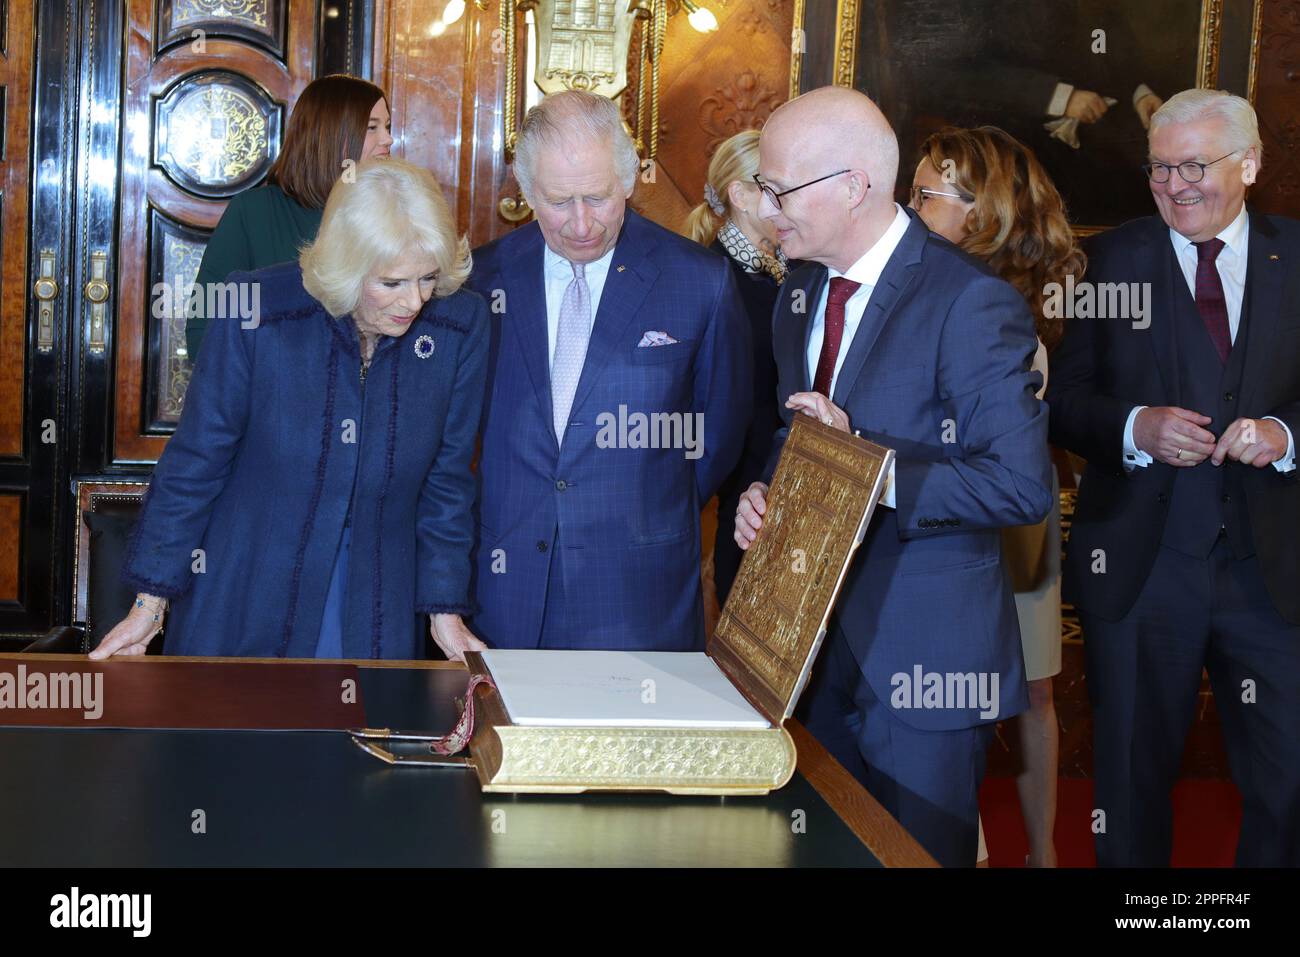 Peter Tschentscher,King Charles III and Queen Consort Camilla,state visit to Hamburg,31.03.2023,entry in the golden book Stock Photo